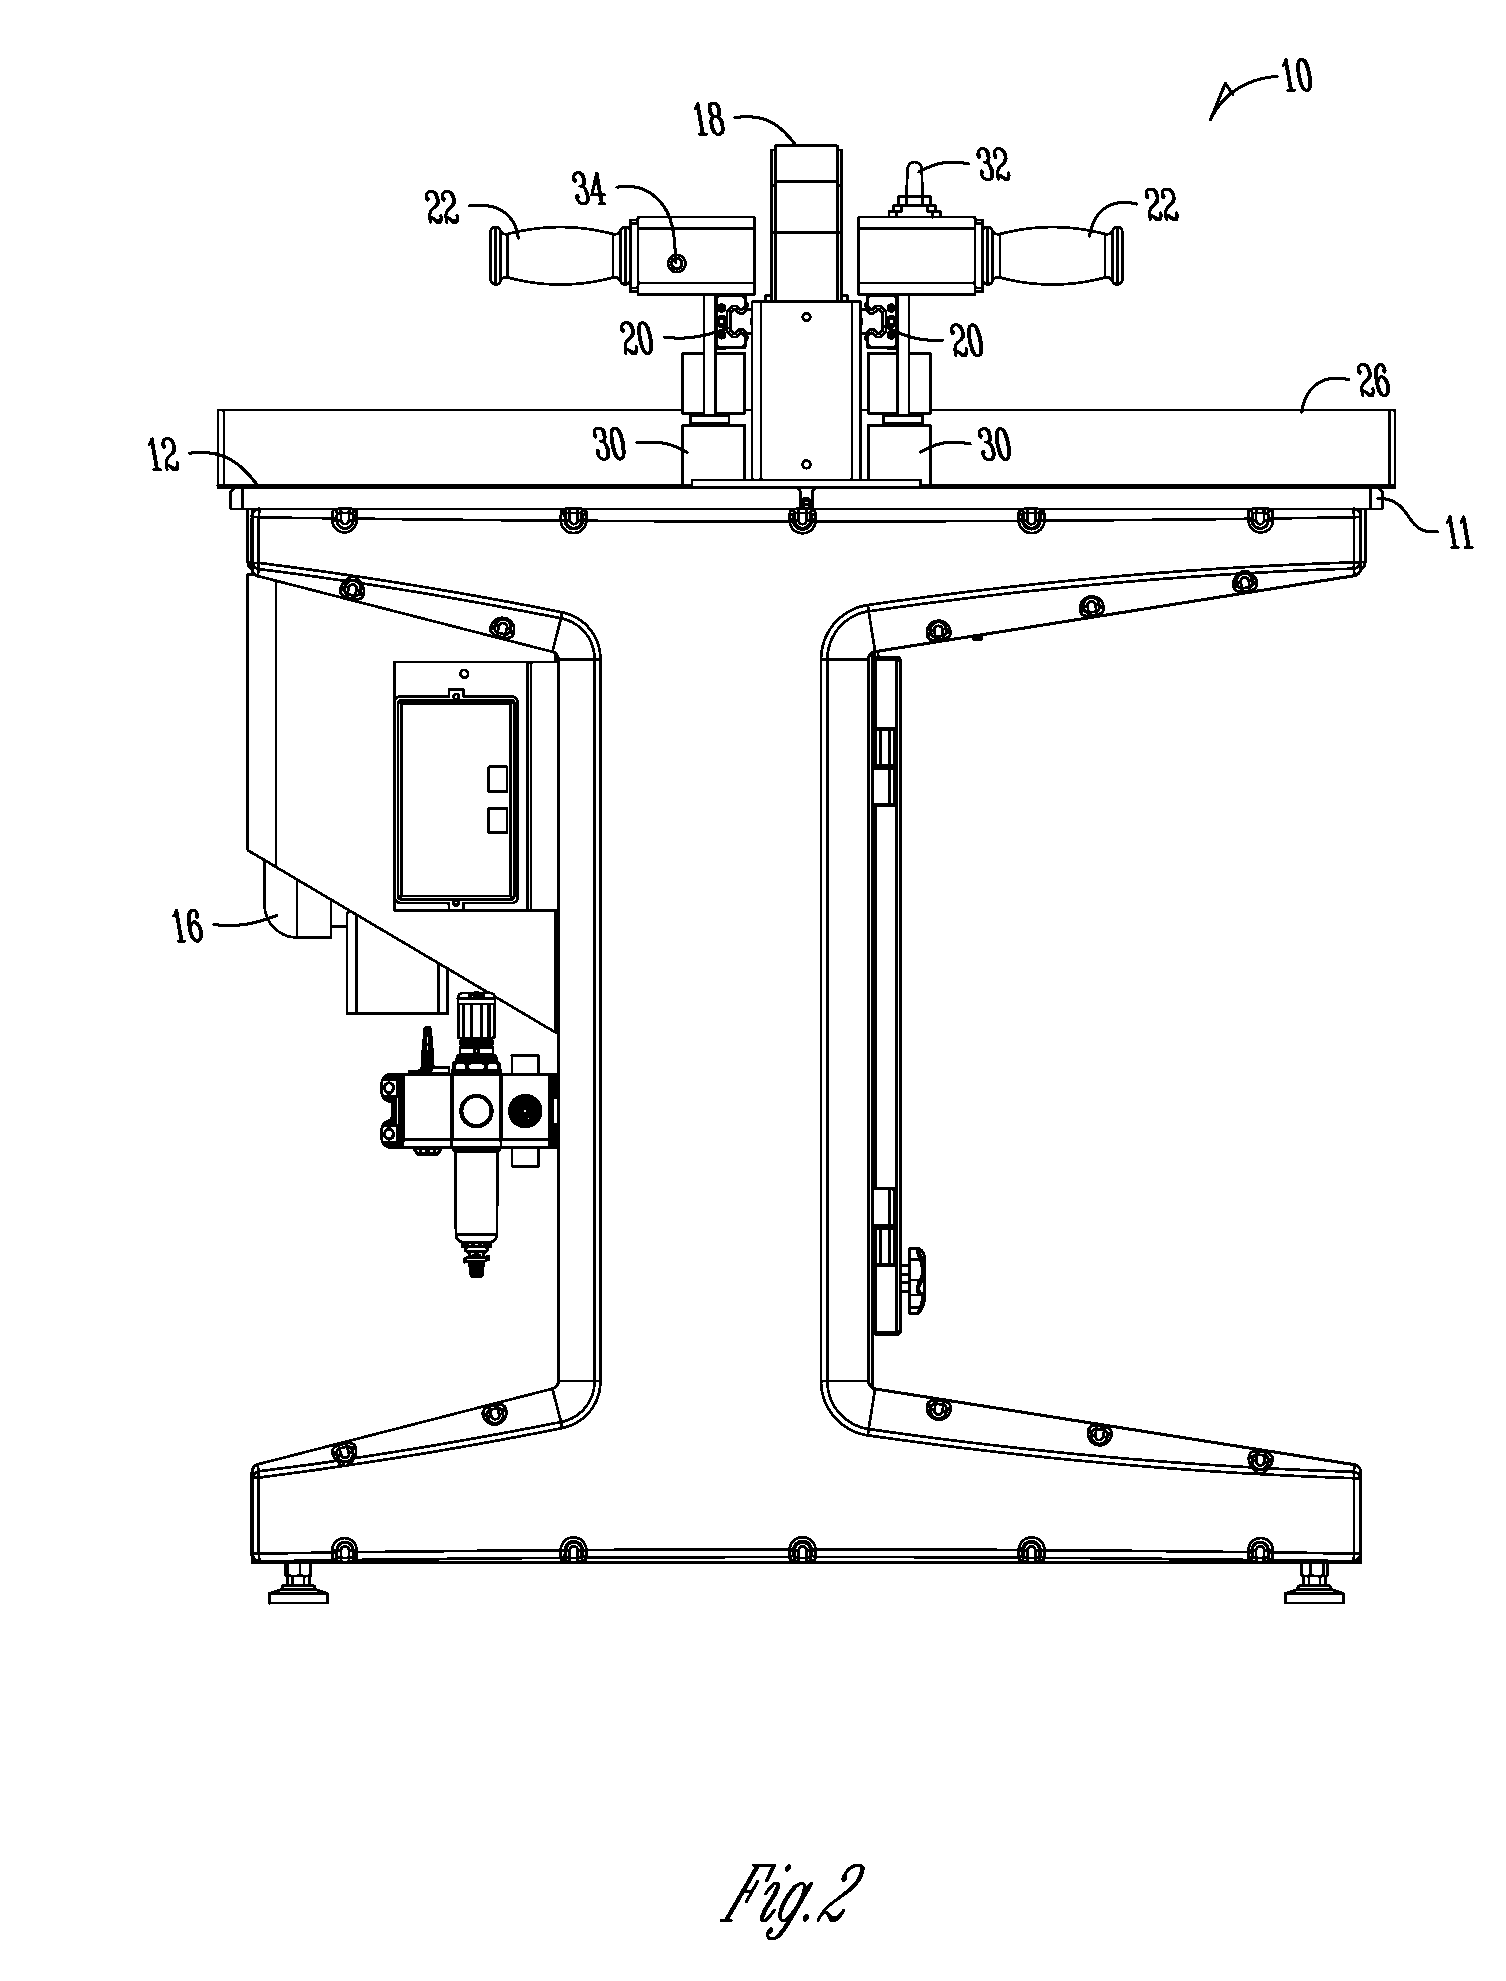 Method and apparatus for sawing lineal material to length